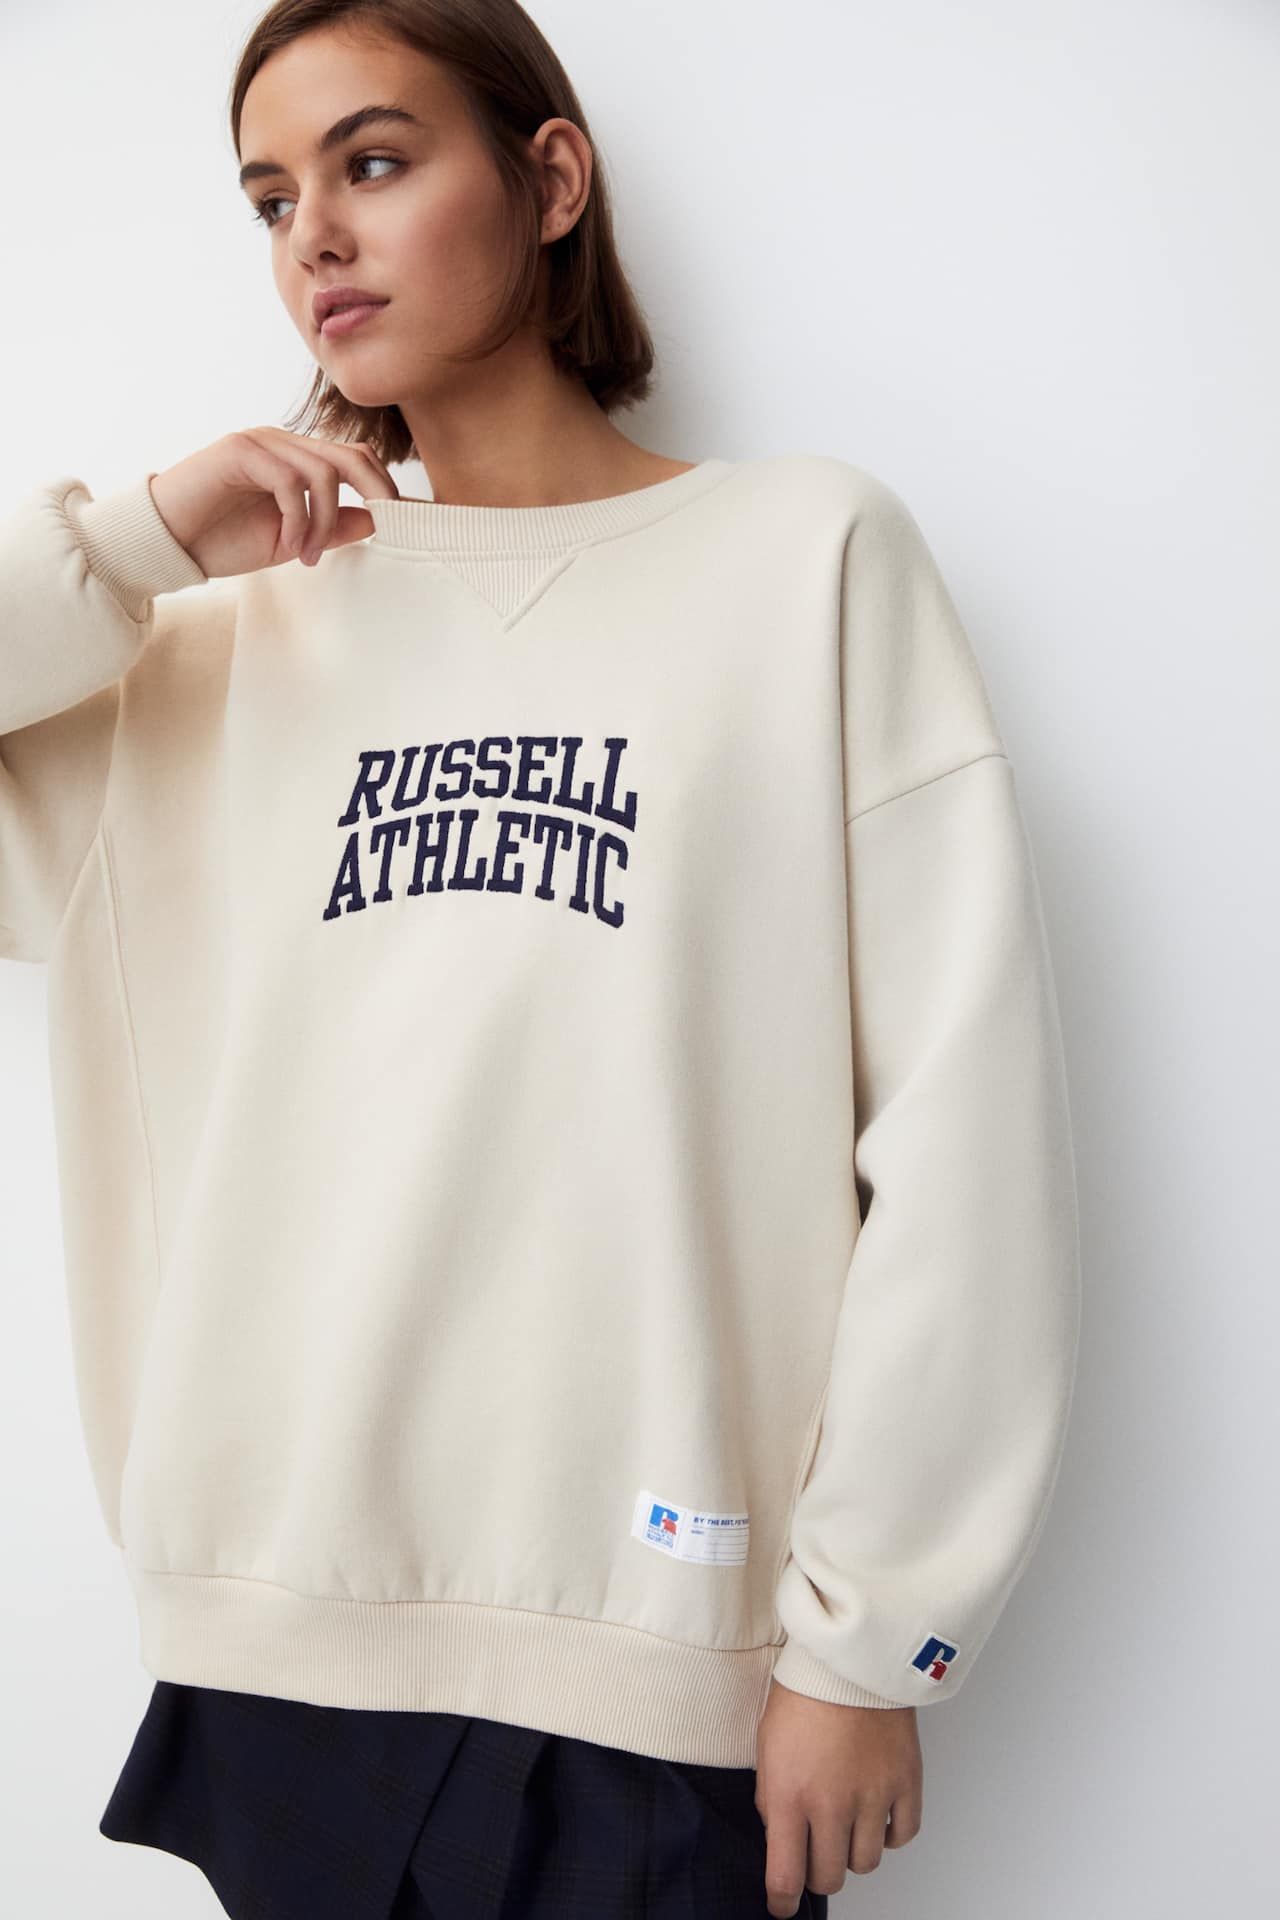 Russell Athletic by P&B sweatshirt | PULL and BEAR UK